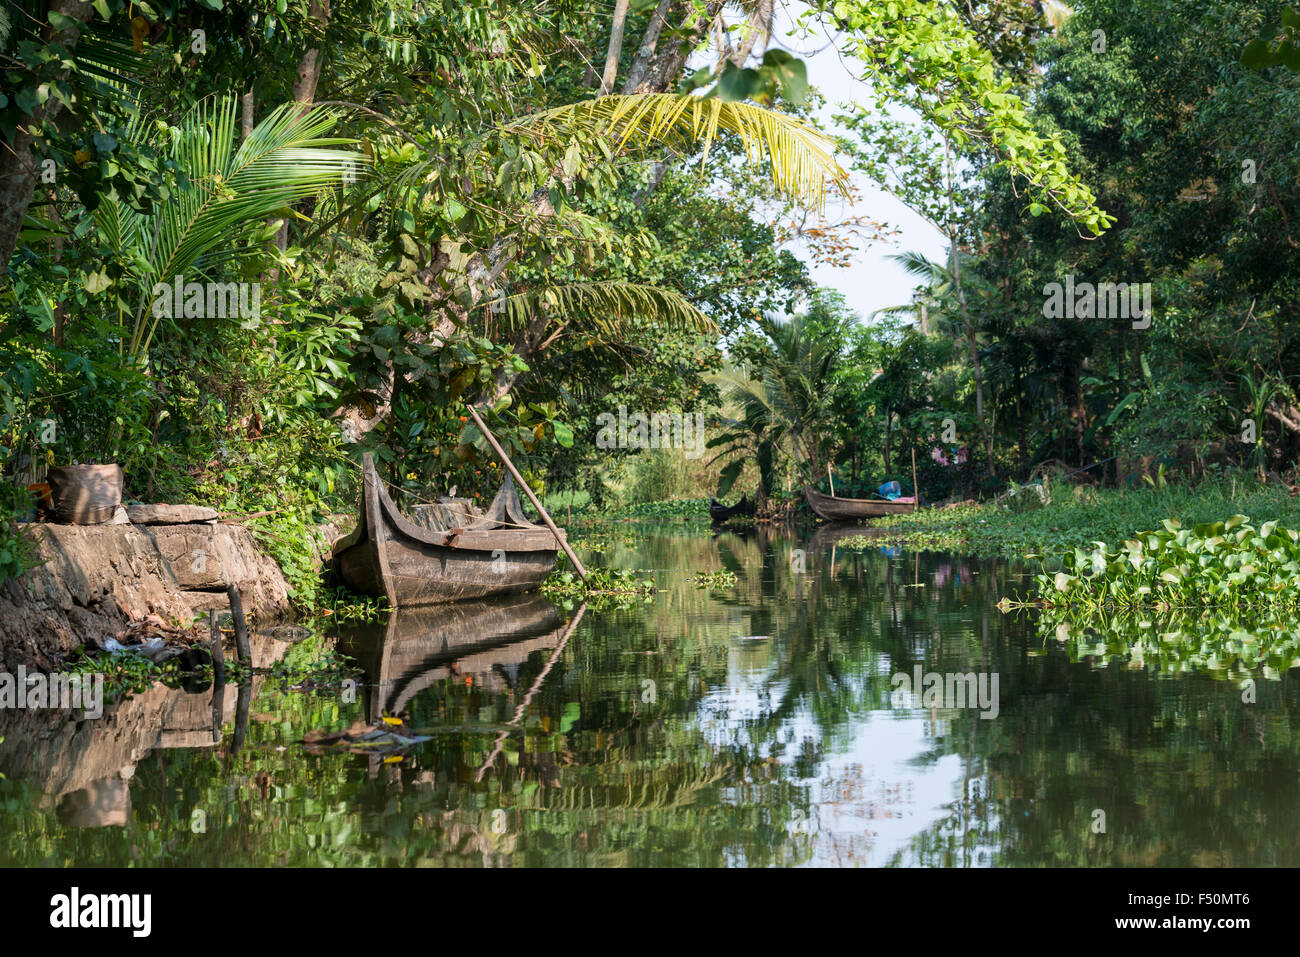 A typical landscape with water canal, palmtrees and a small wooden boat in Keralas backwaters Stock Photo